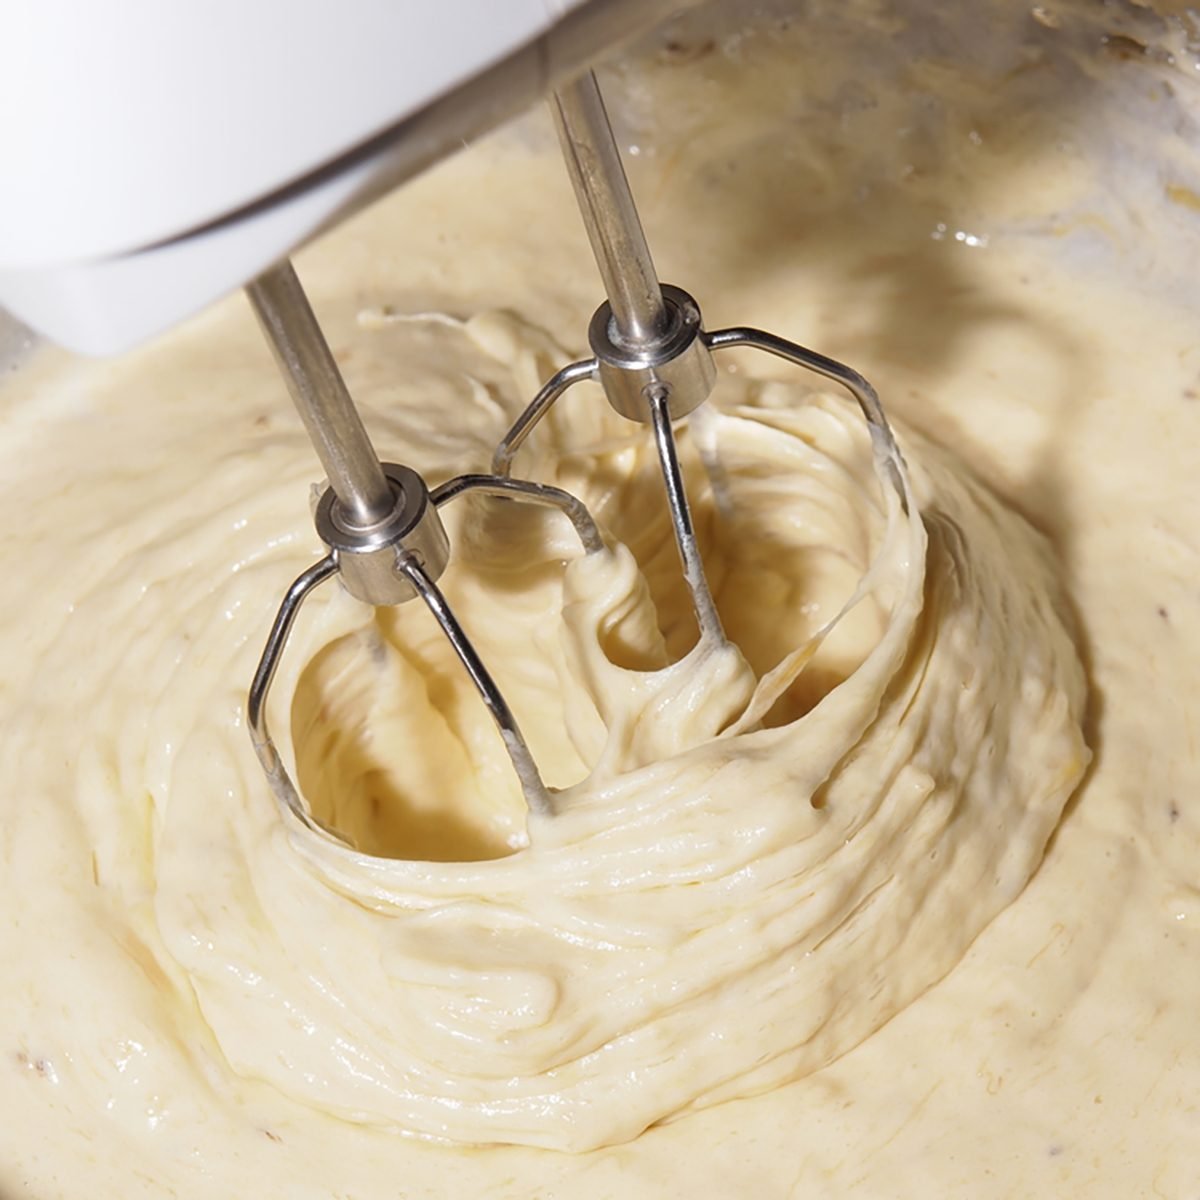 Don't Overbeat the Cheesecake Batter